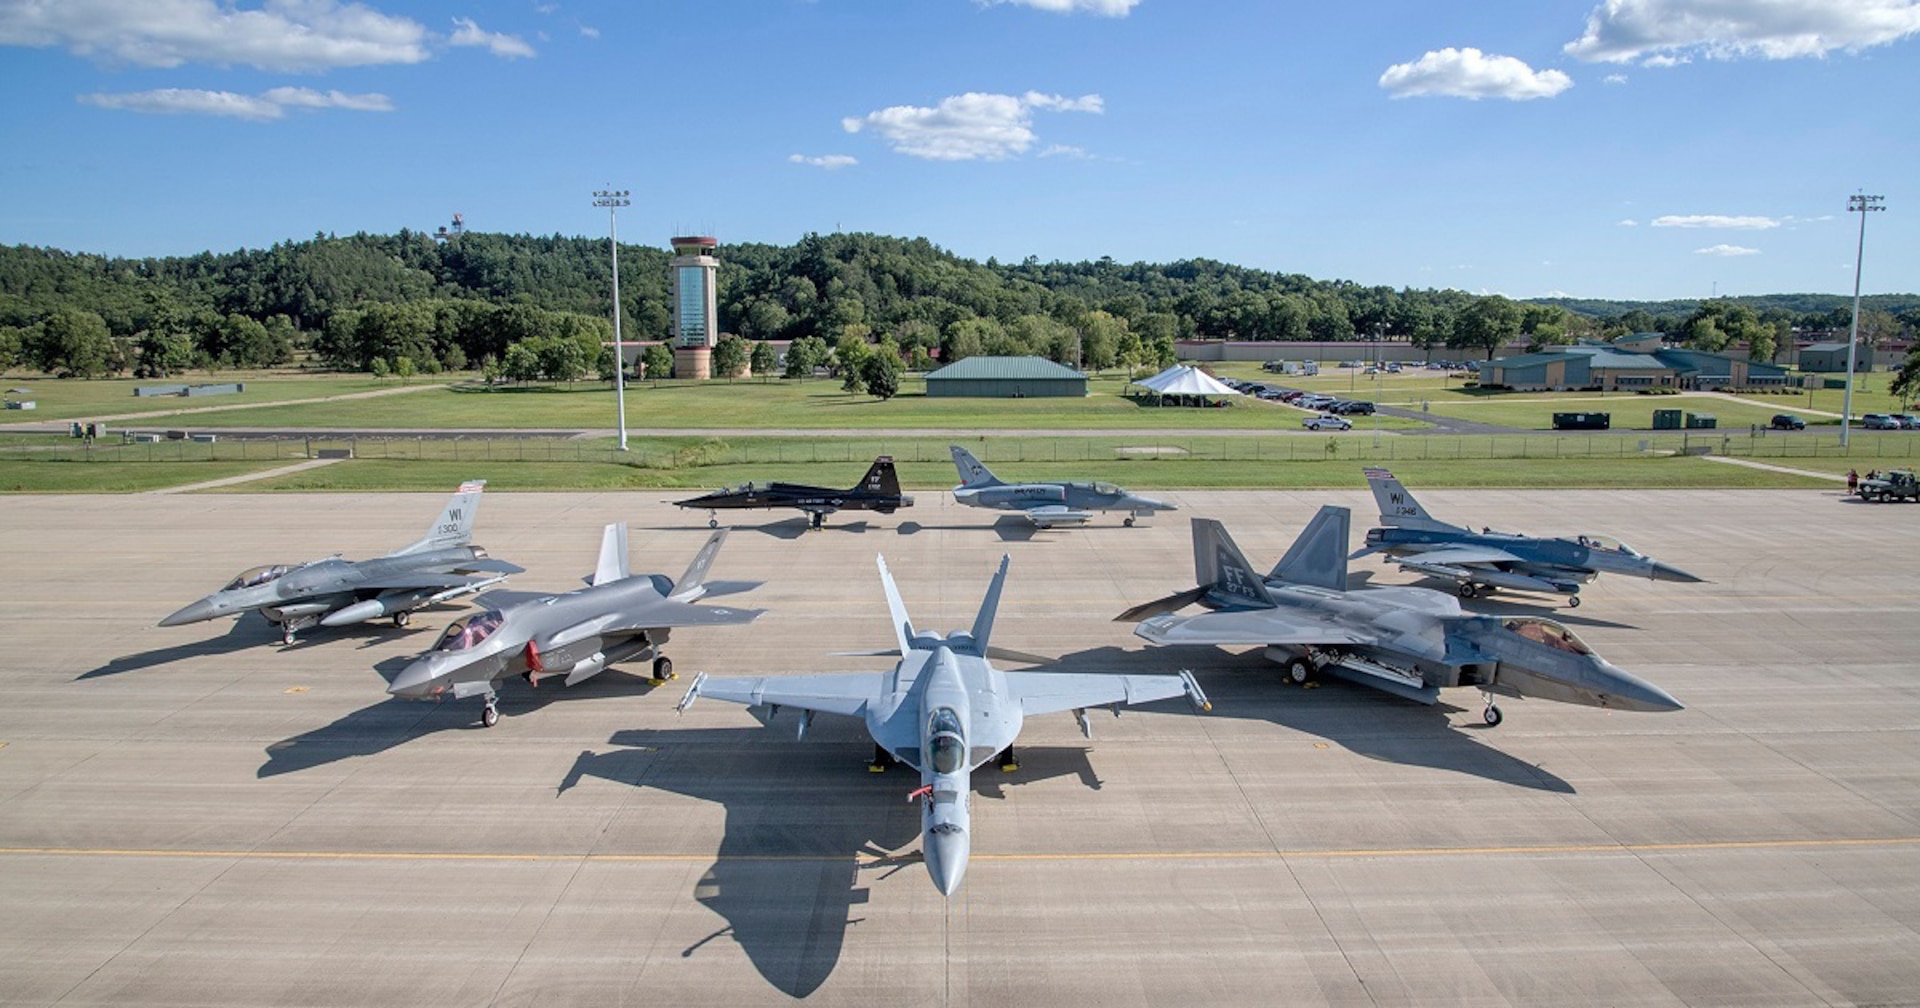 A variety of the world’s most advanced aircraft will assemble at Volk Field Combat Readiness Training Center in Wisconsin for the joint-accredited exercise Northern Lightning Aug. 8-19, 2022.